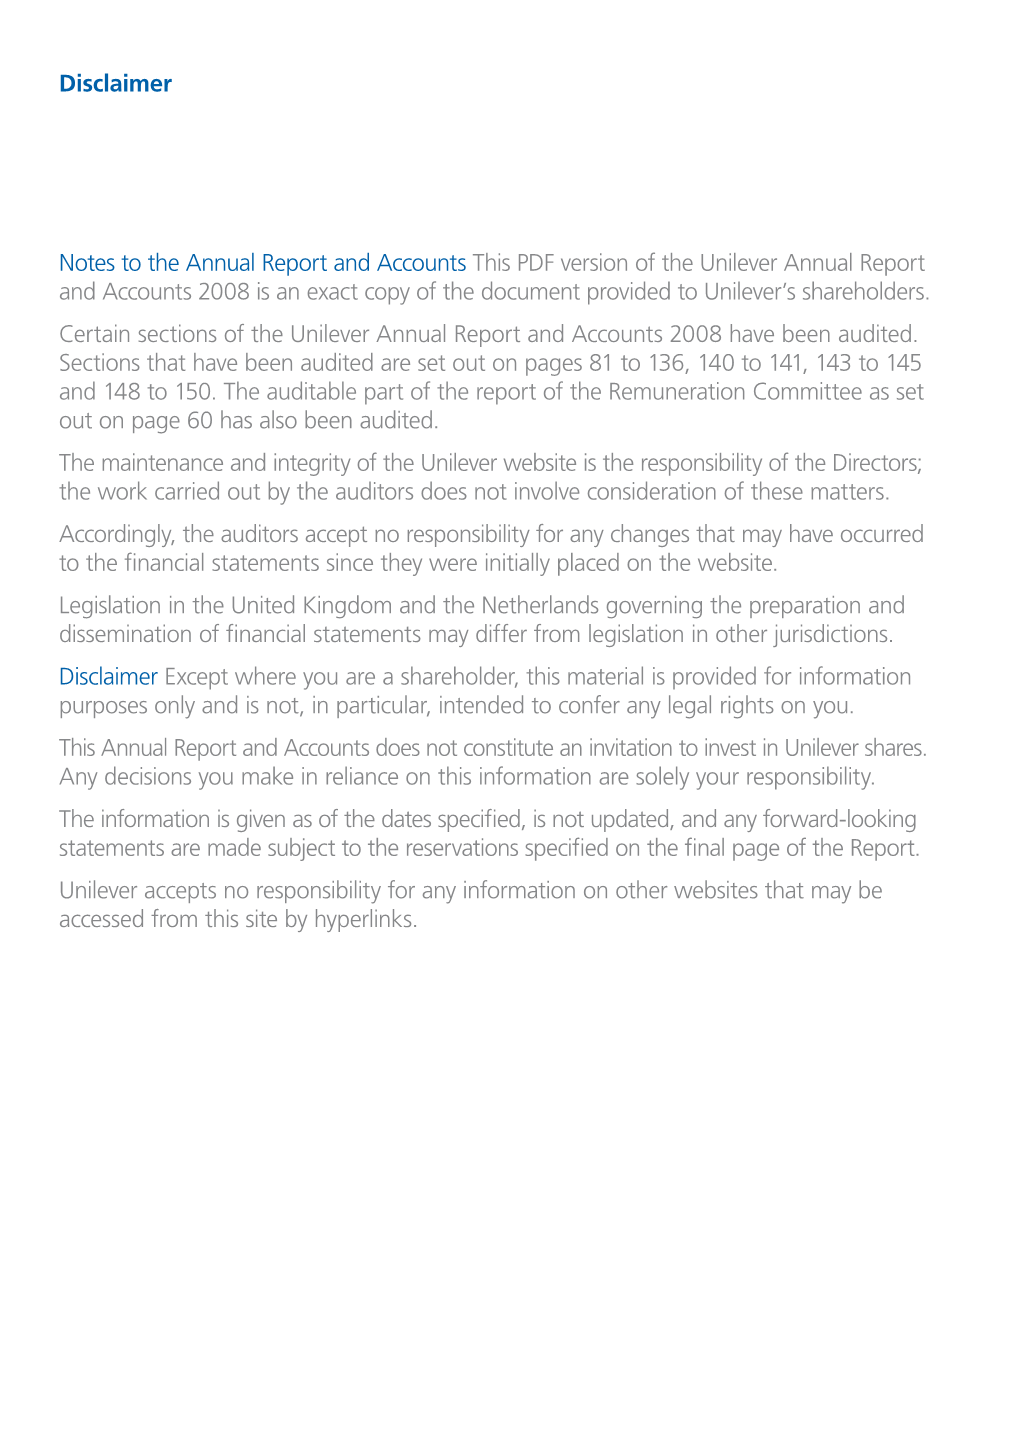 Annual Report and Accounts 2008 Is an Exact Copy of the Document Provided to Unilever’S Shareholders